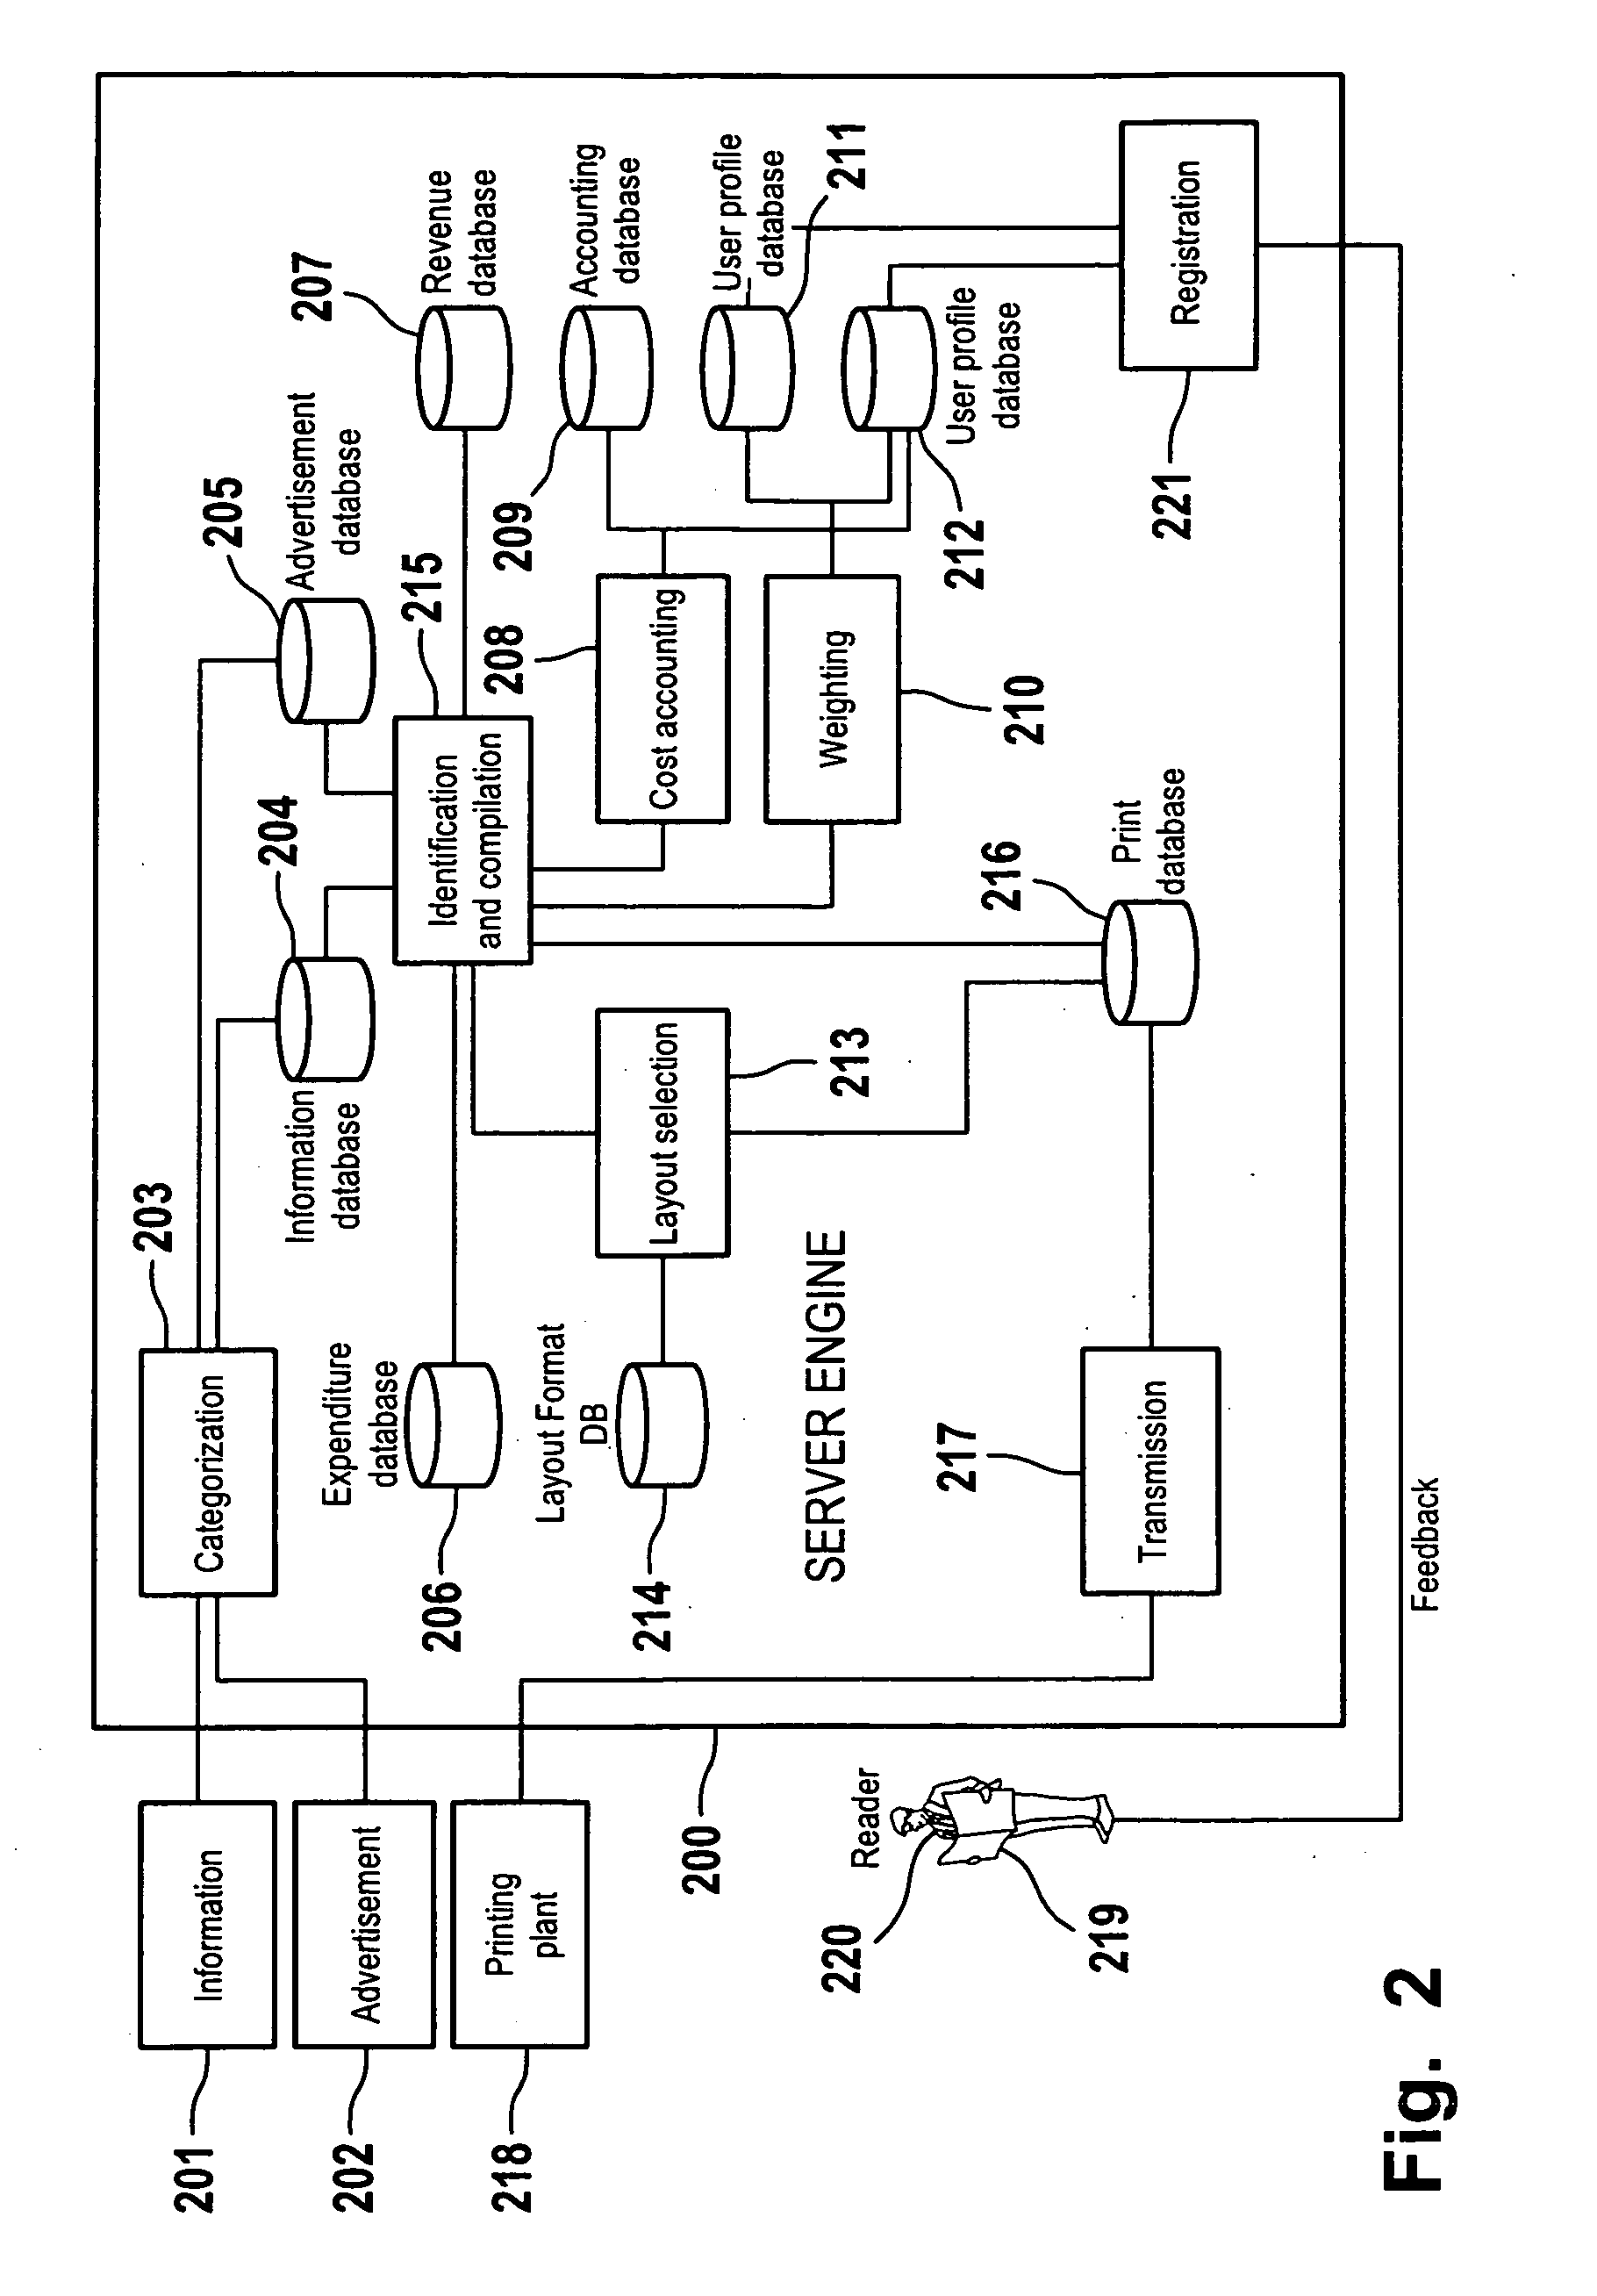 System and process for the production of a customer individualized print product